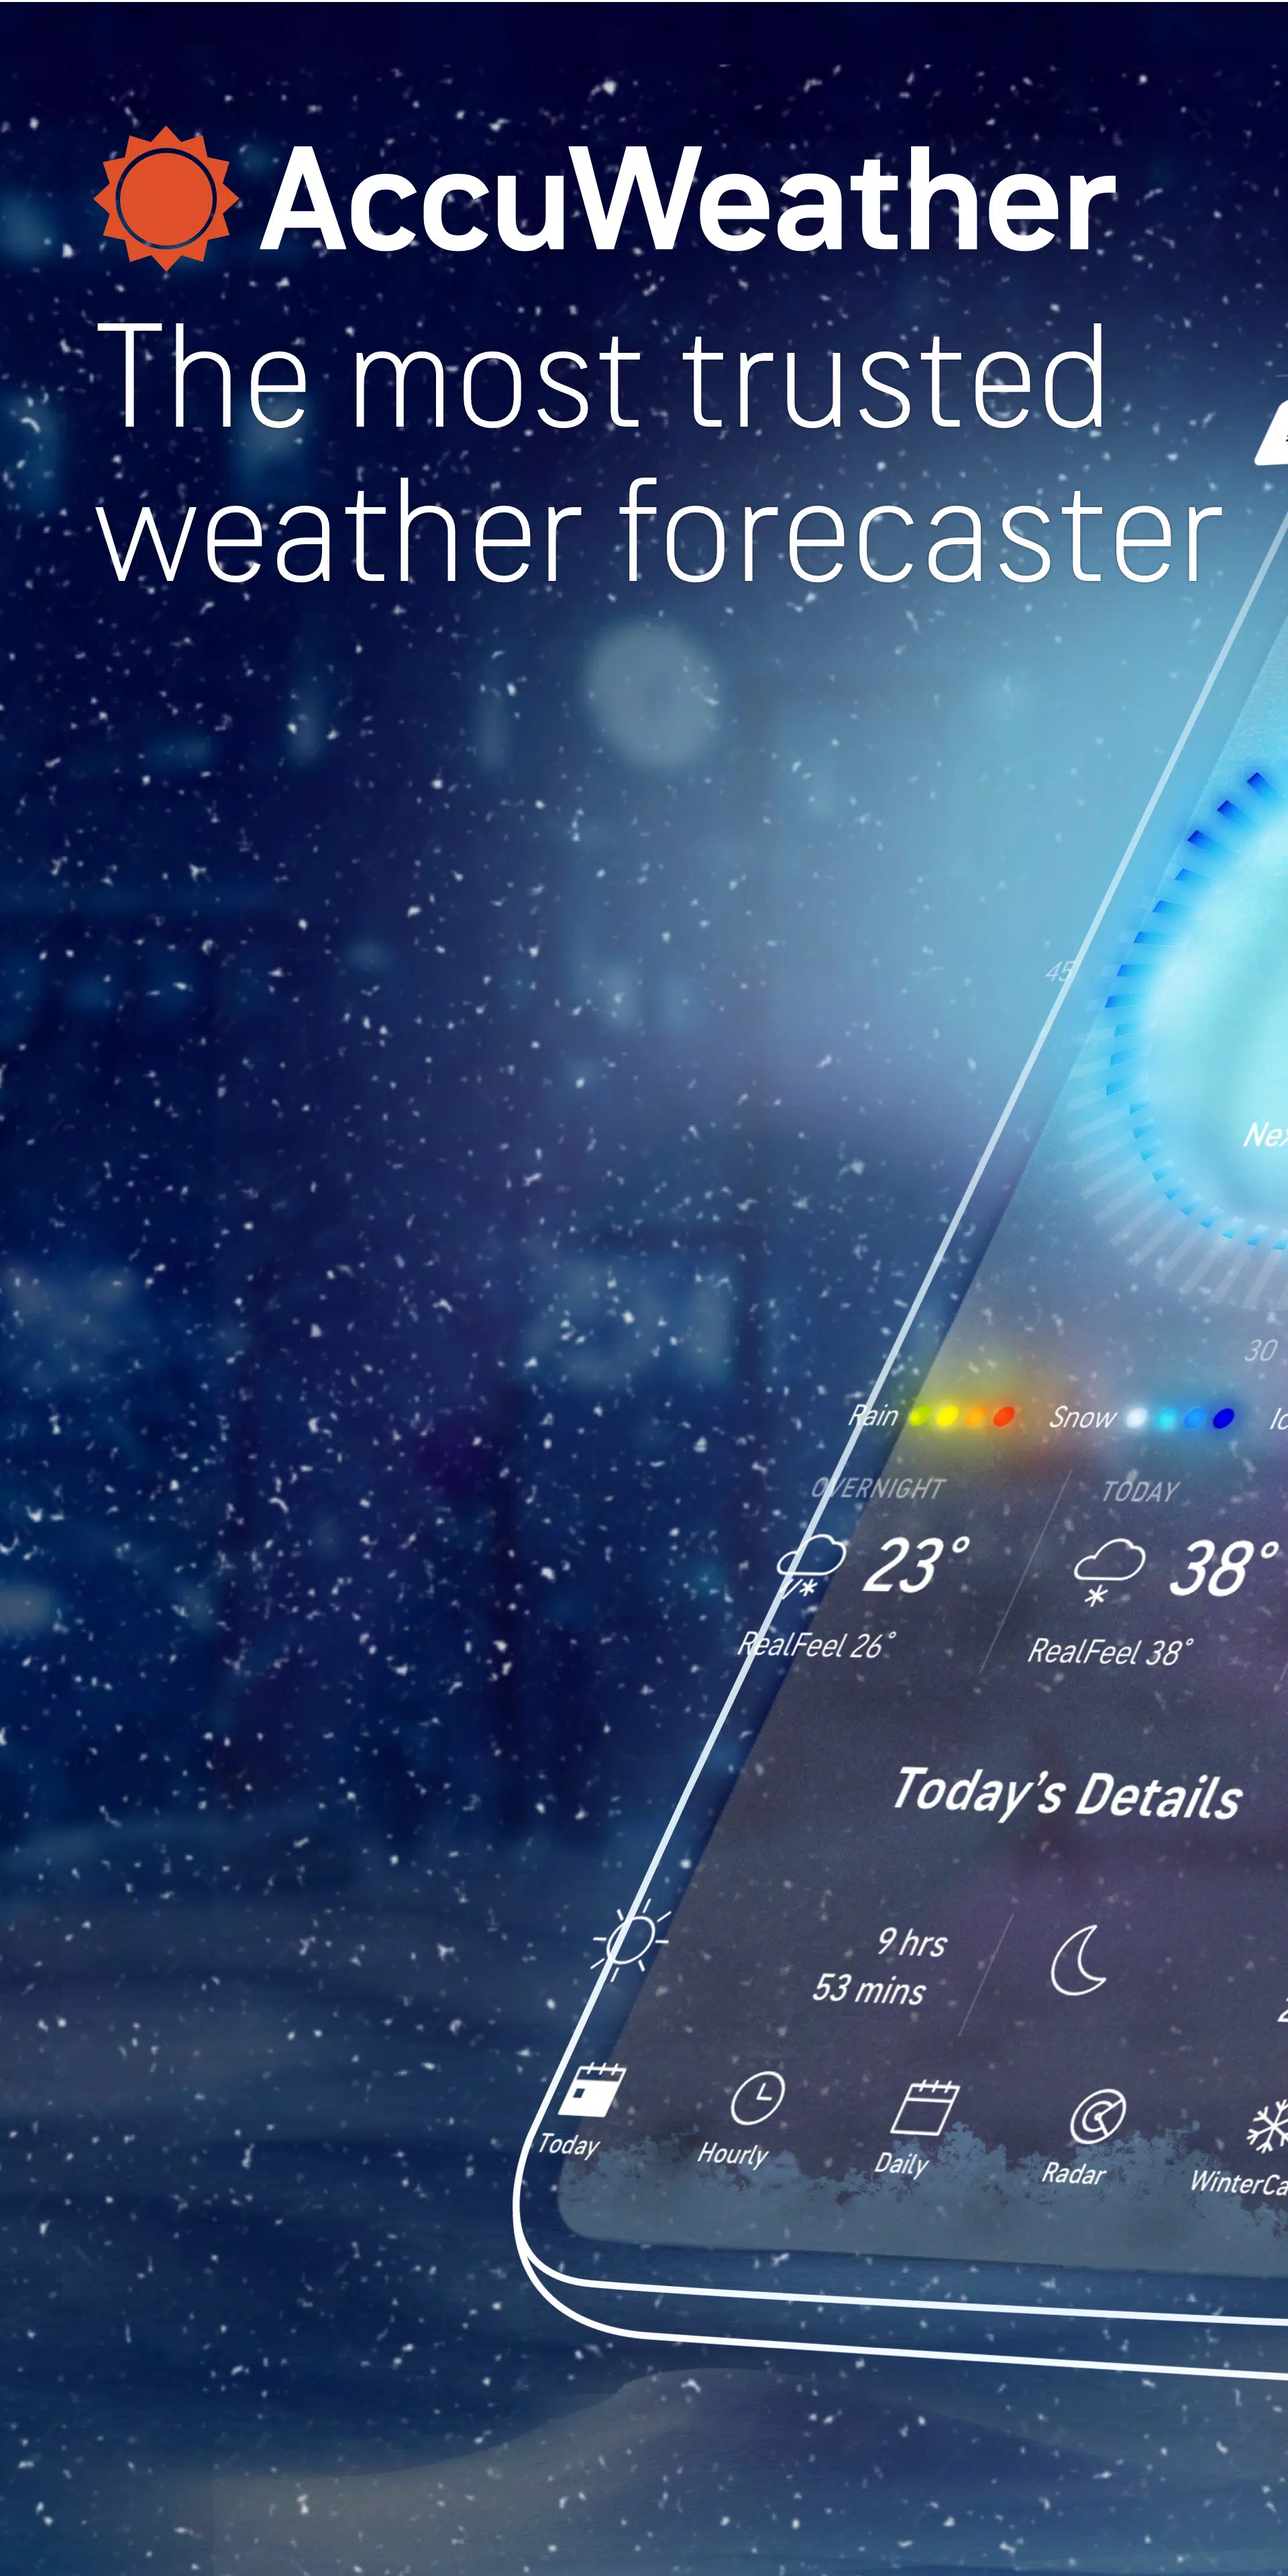 Detail Accuweather Live Wallpaper Nomer 17